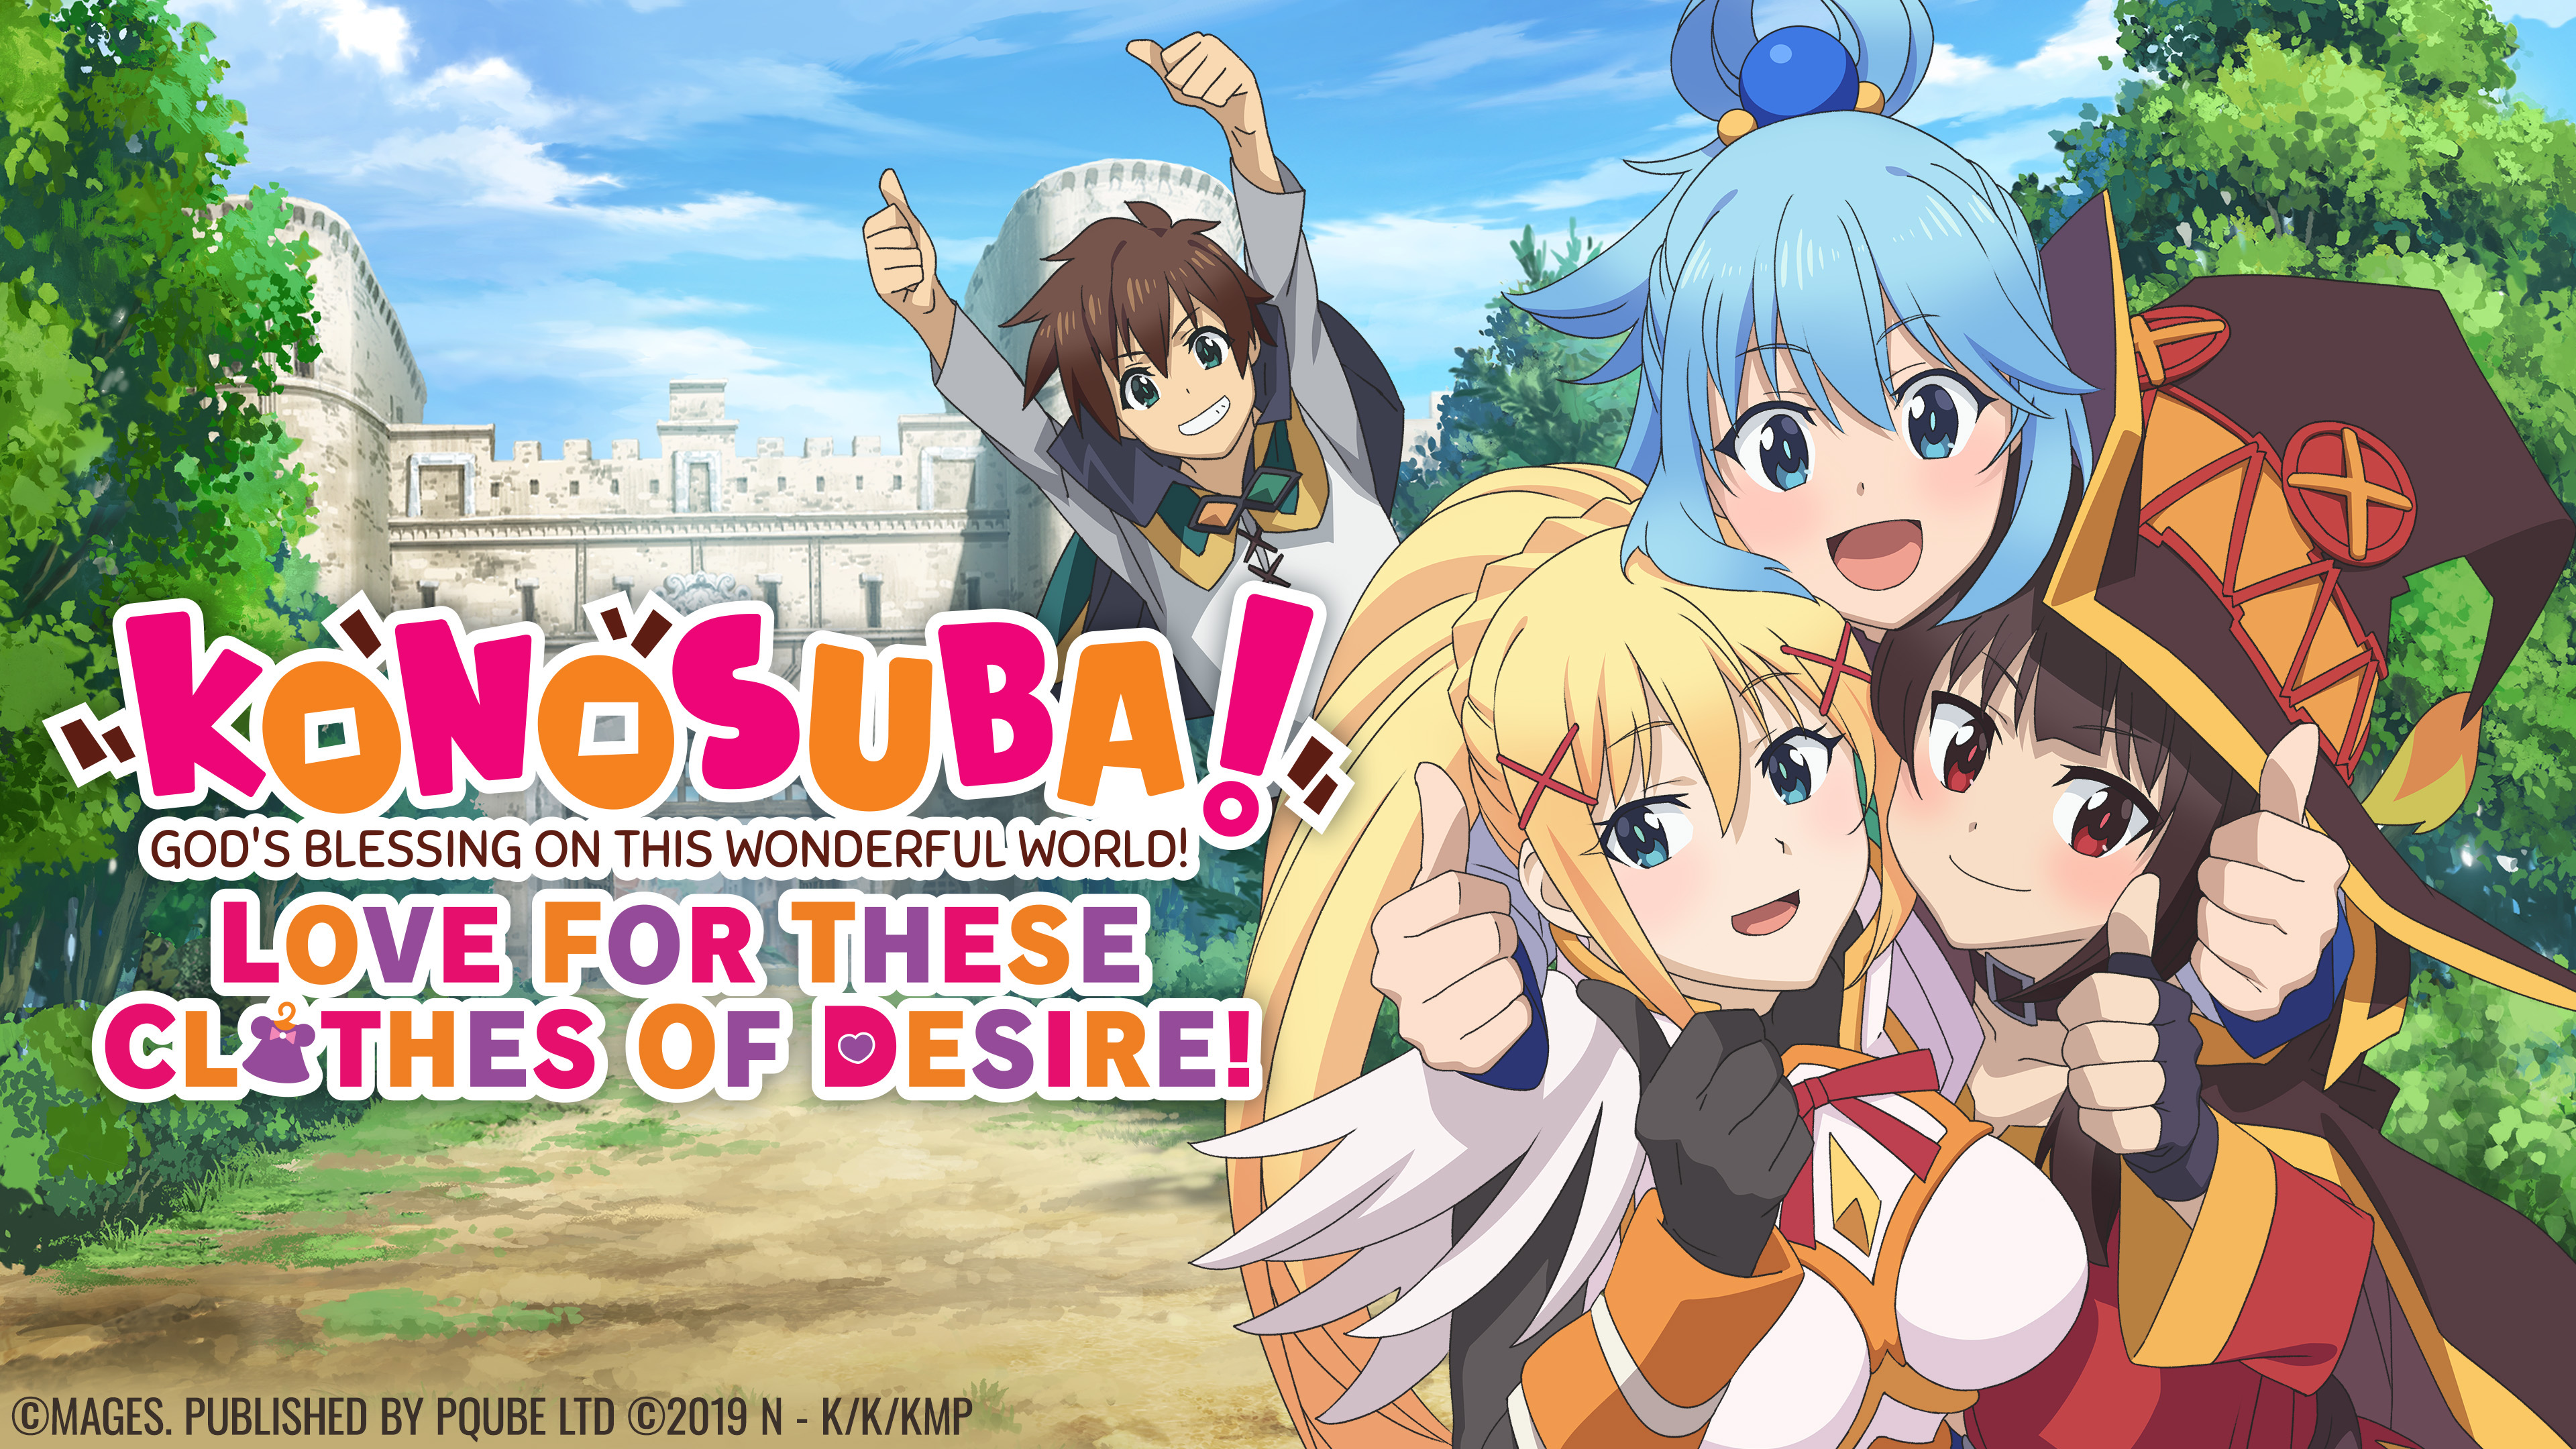 konosuba: Love For These Clothes Of Desire Release Date Announced